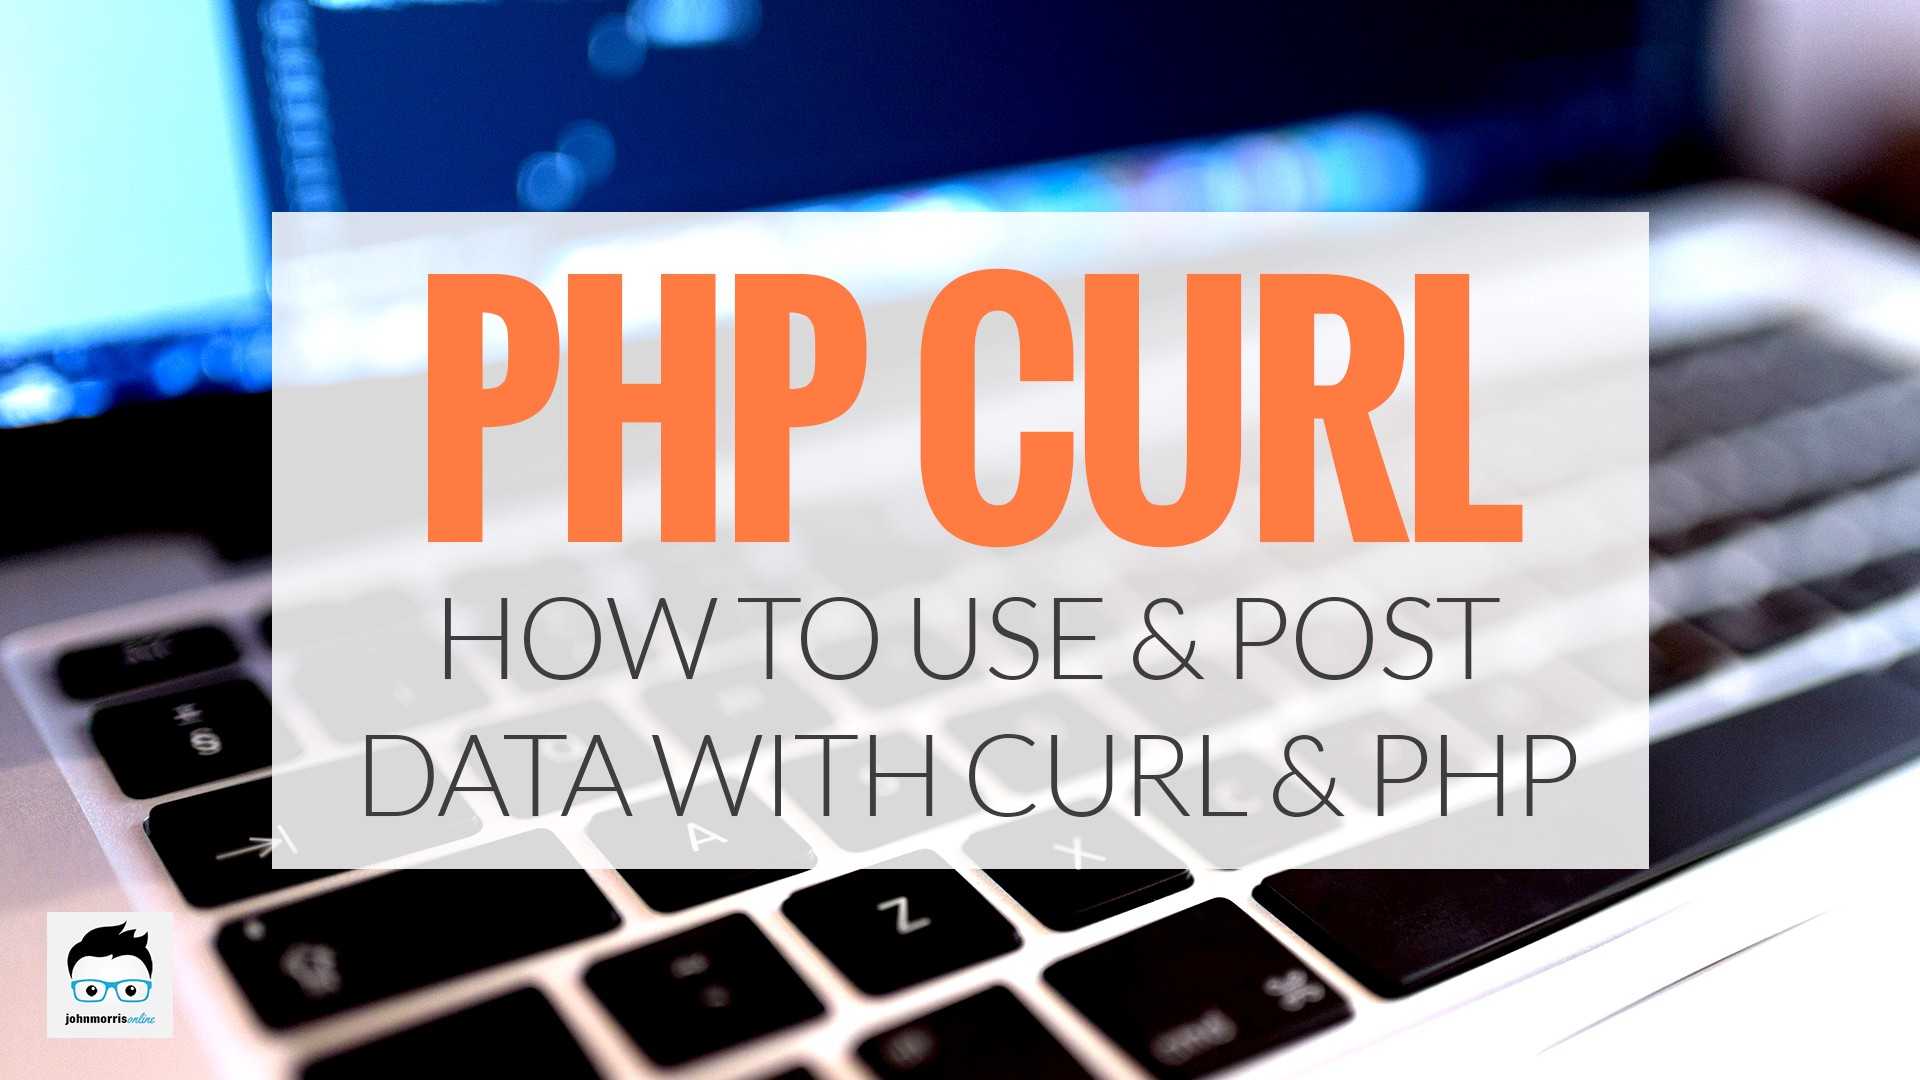 Php curl get. Curl php. Curlsbot.